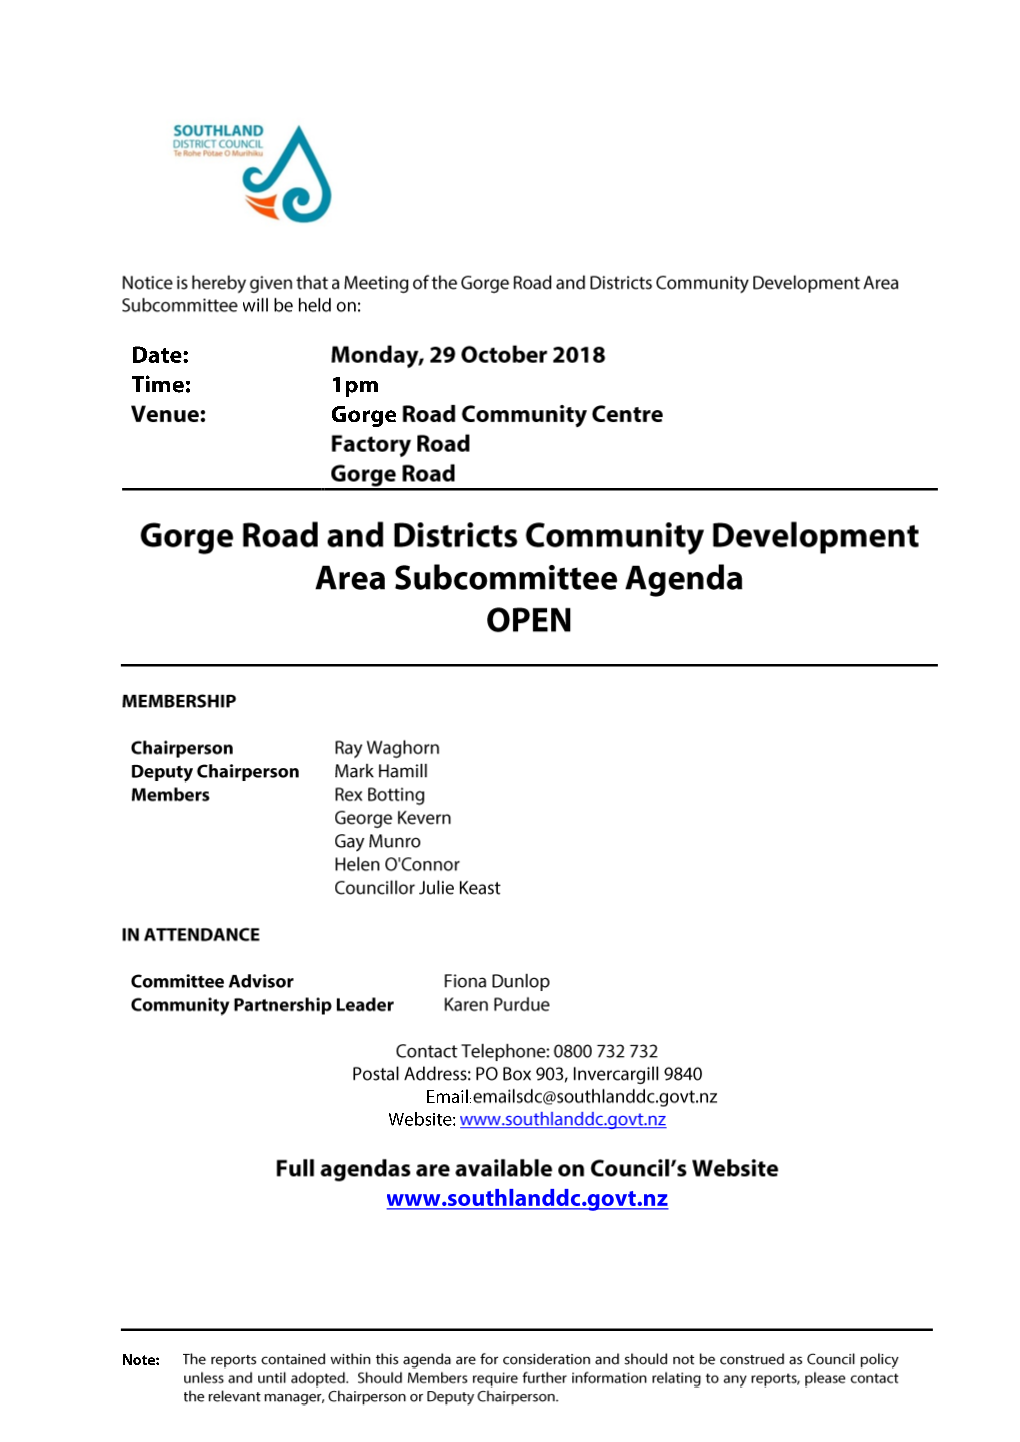 Agenda of Gorge Road and Districts Community Development Area